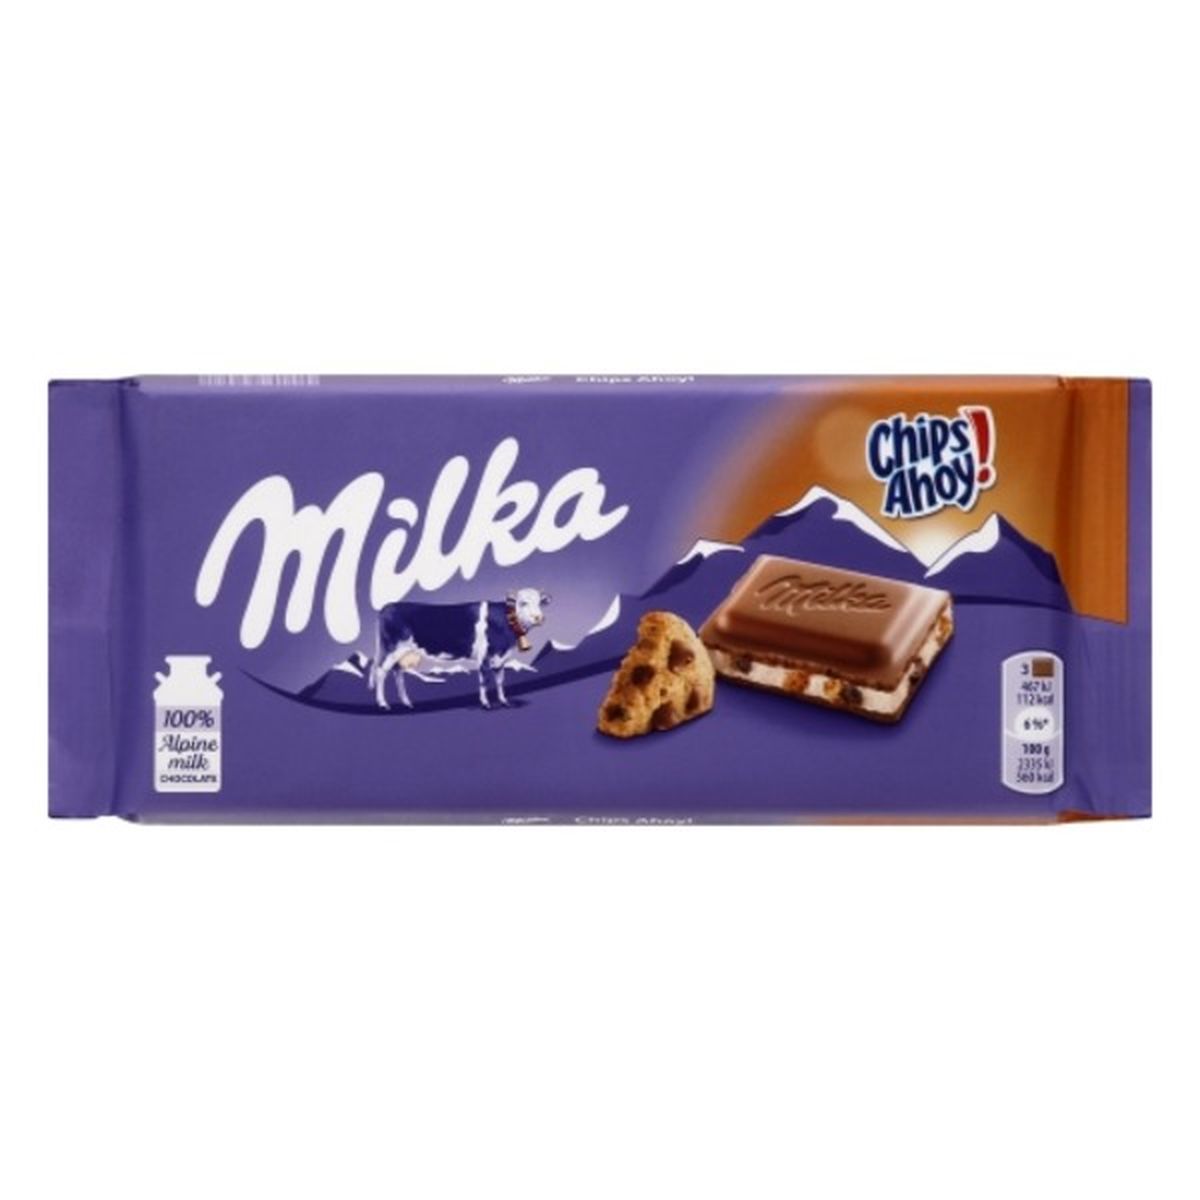 Calories in Milka Chocolate, Chips Ahoy